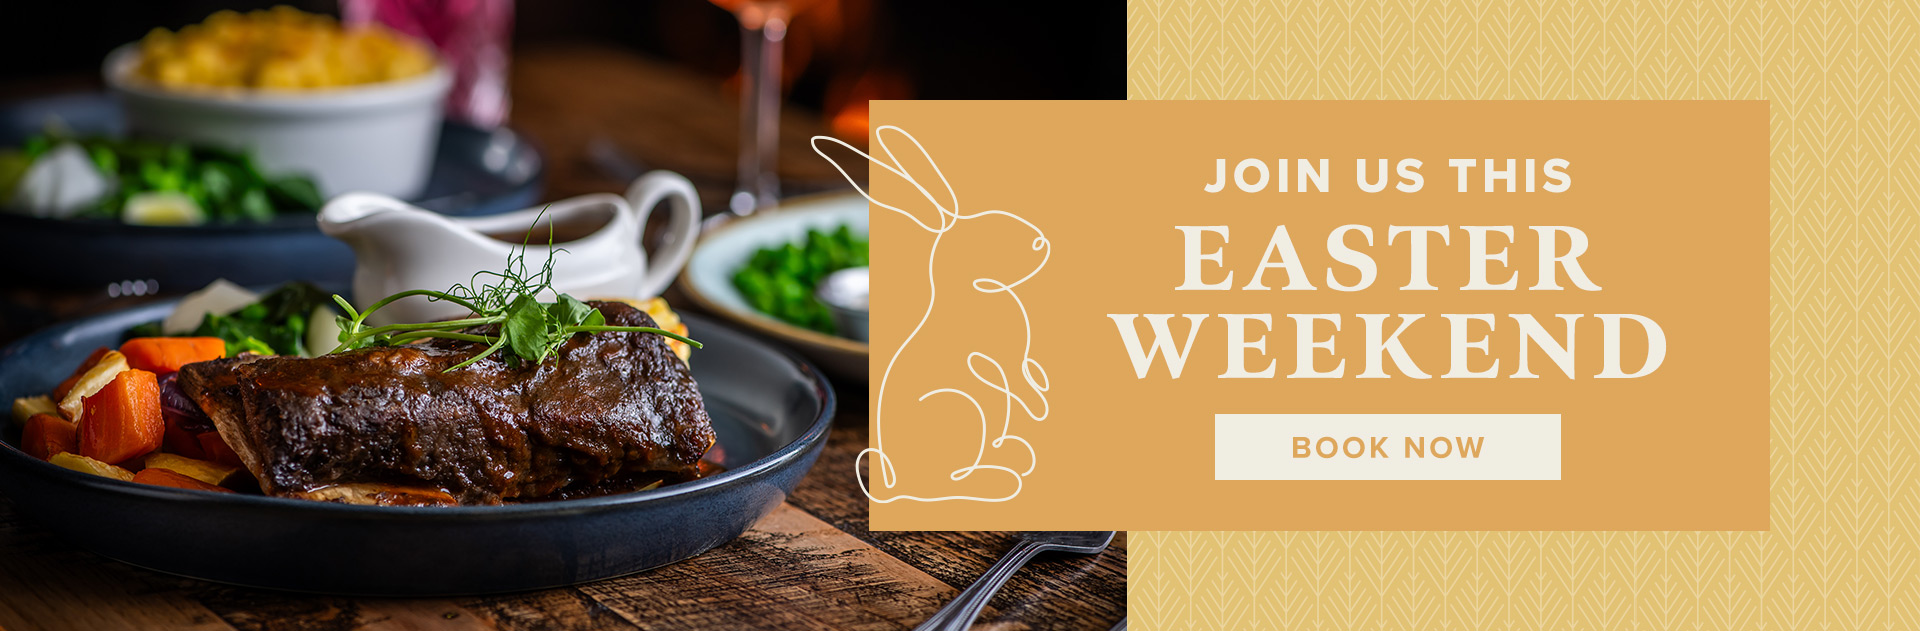 Easter at The Essex Arms in Watford